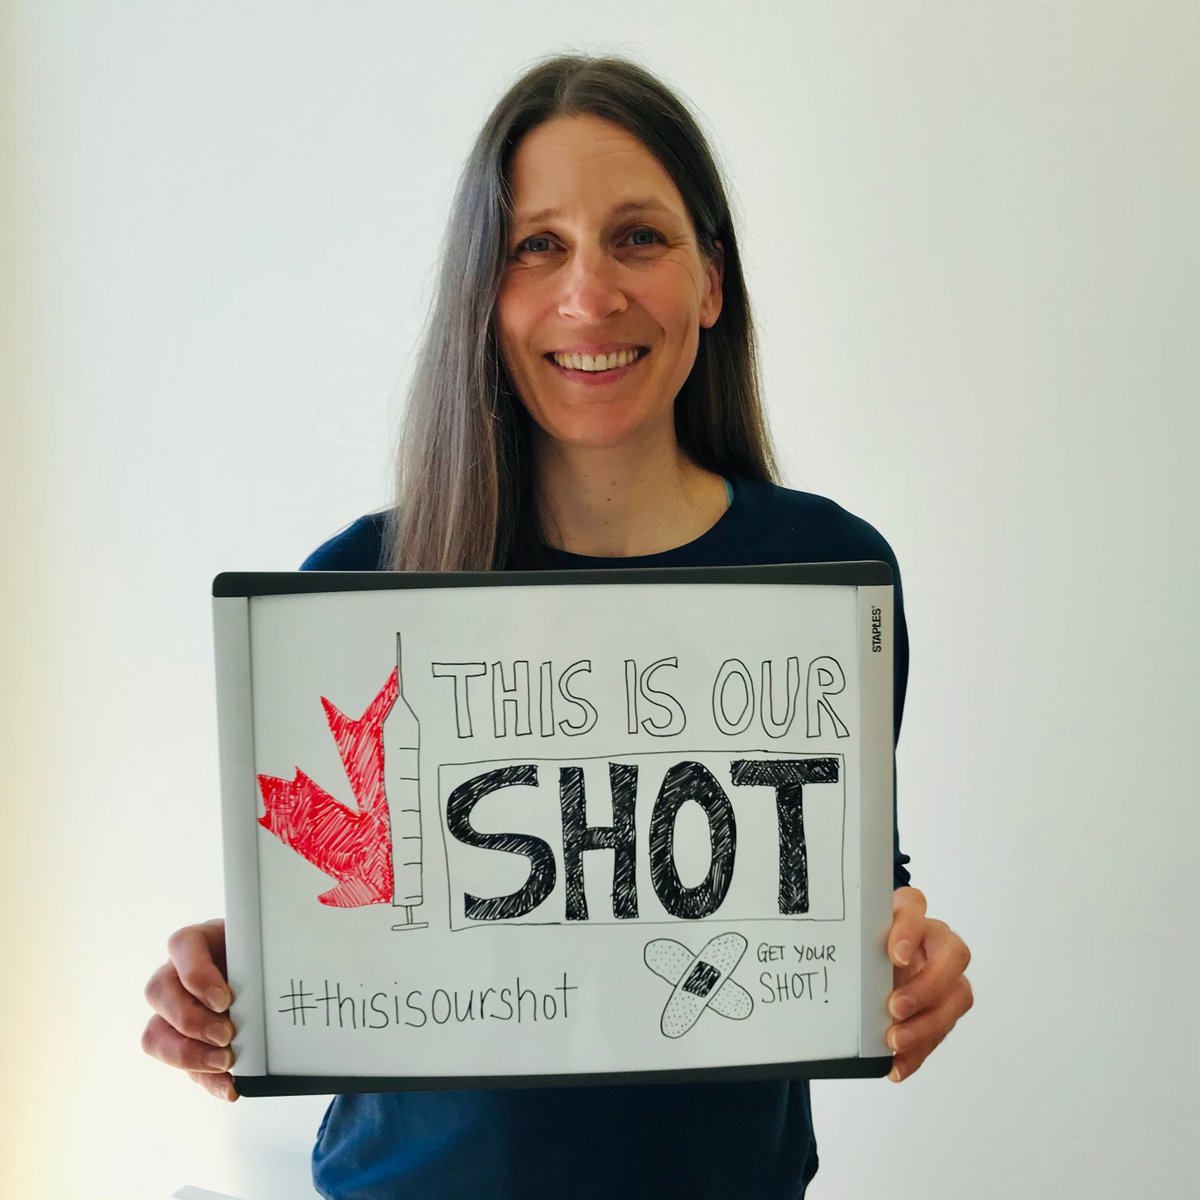 Hey Canada! I got vaccinated! I want you to join the #ThisIsOurShotCA challenge and tag your friends and family to get vaccinated. Let’s all get the shot and get back to doing the things we love. For info on the campaign go to thisisourshot.ca. @wick_22 @clarahughes